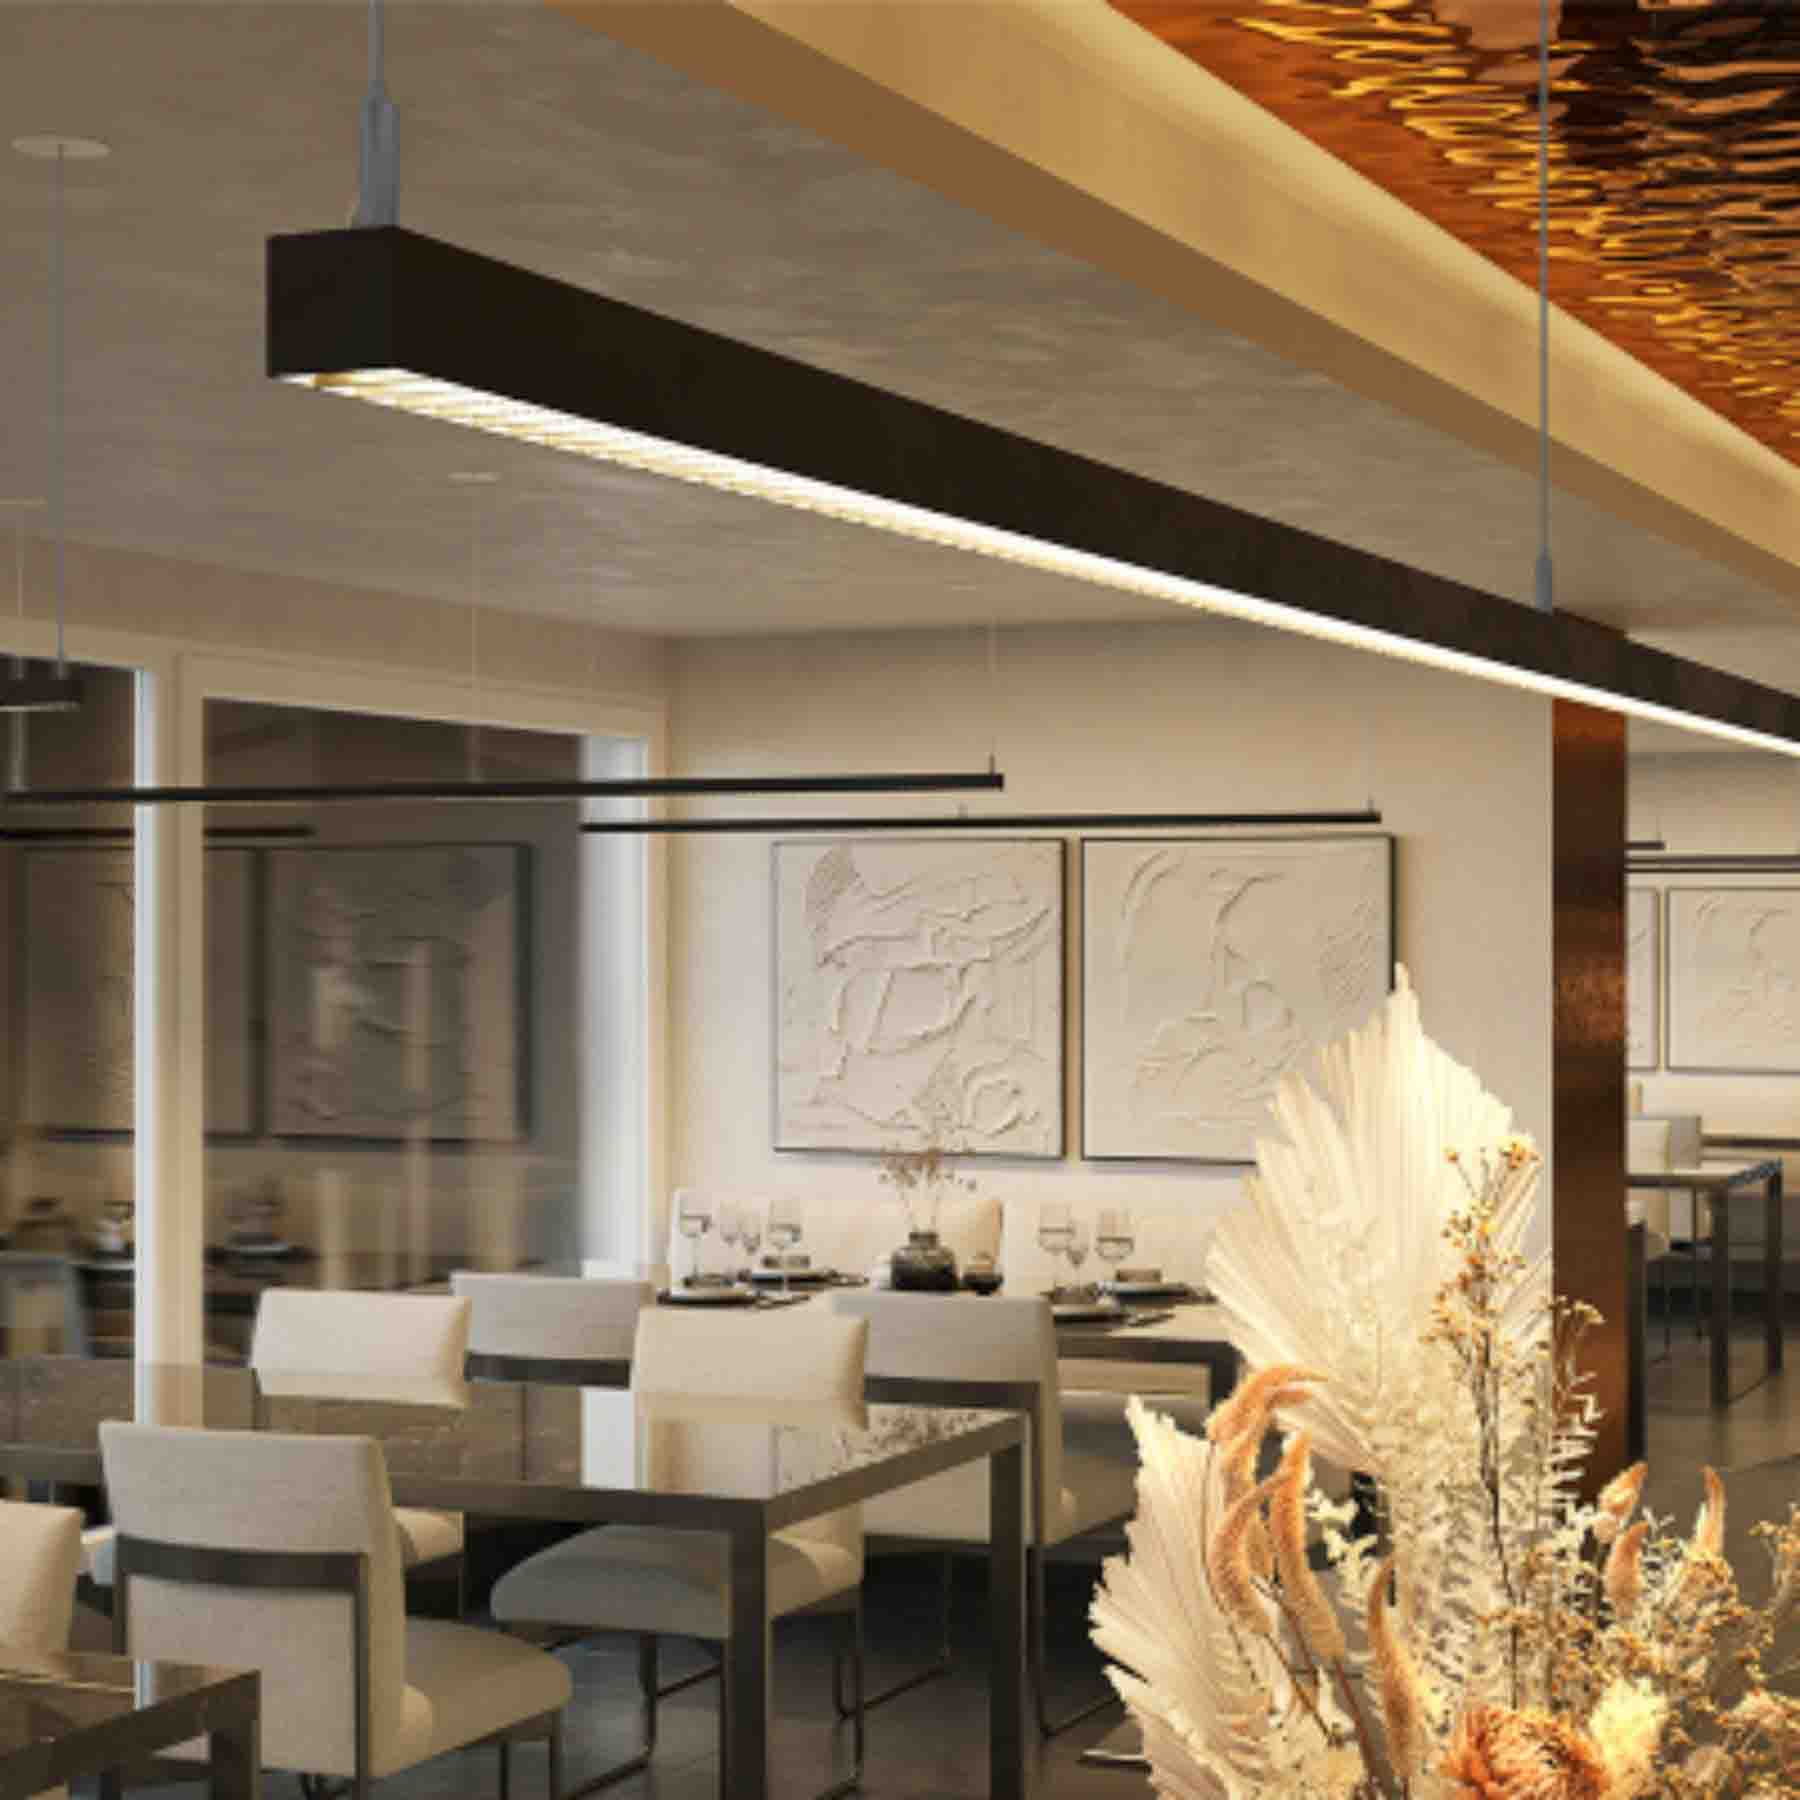 this light serves as the quintessential focal point for a modern minimalist and chic restaurant setting